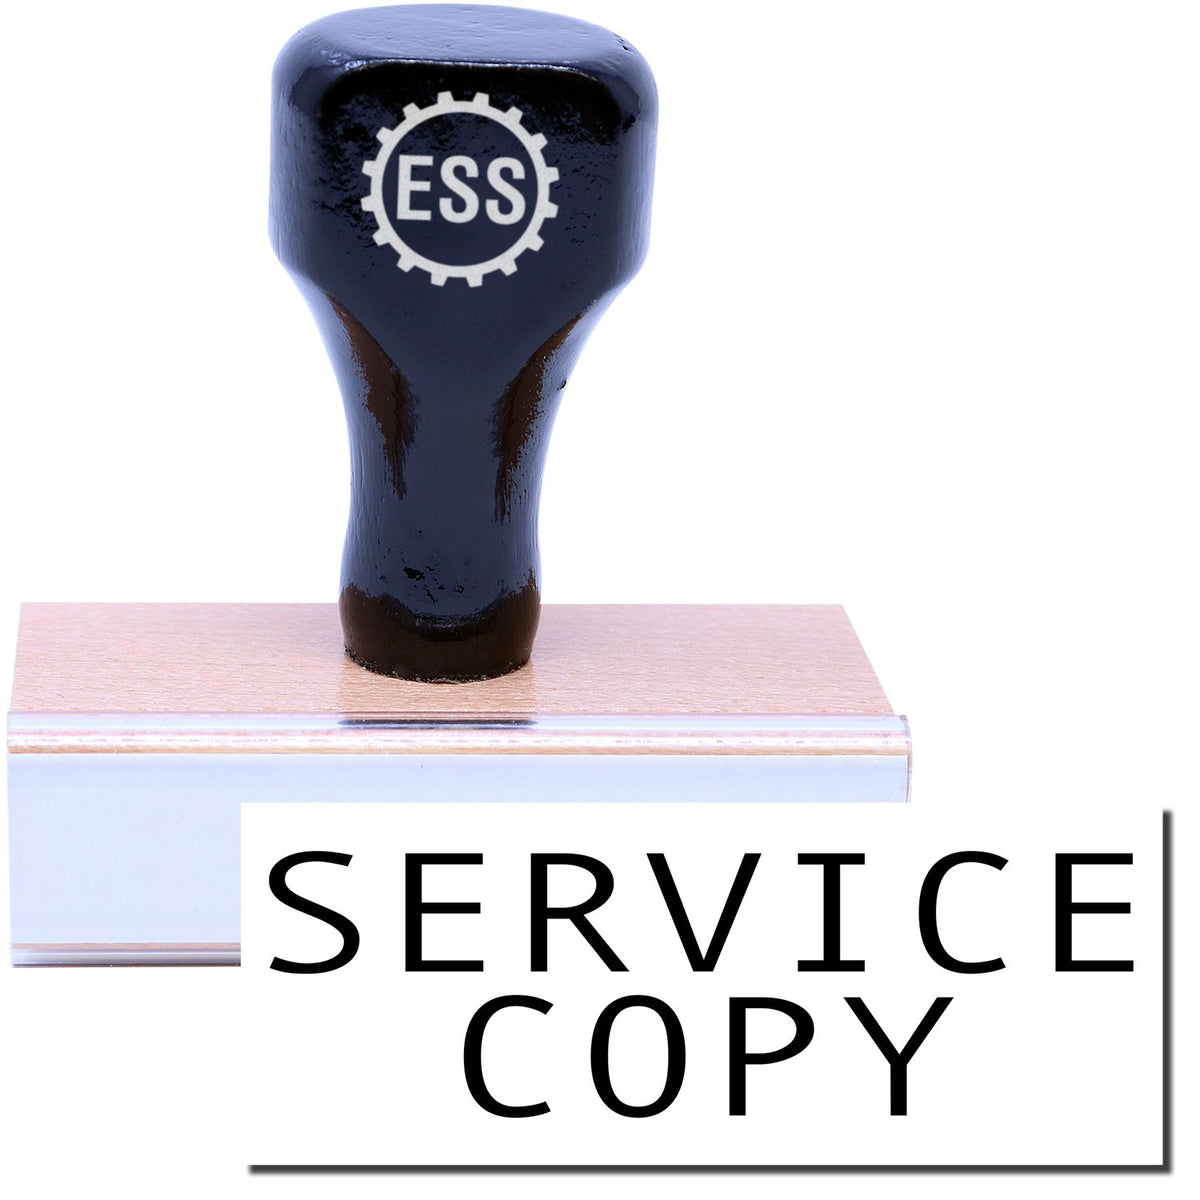 A stock office rubber stamp with a stamped image showing how the text &quot;SERVICE COPY&quot; in a large font is displayed after stamping.